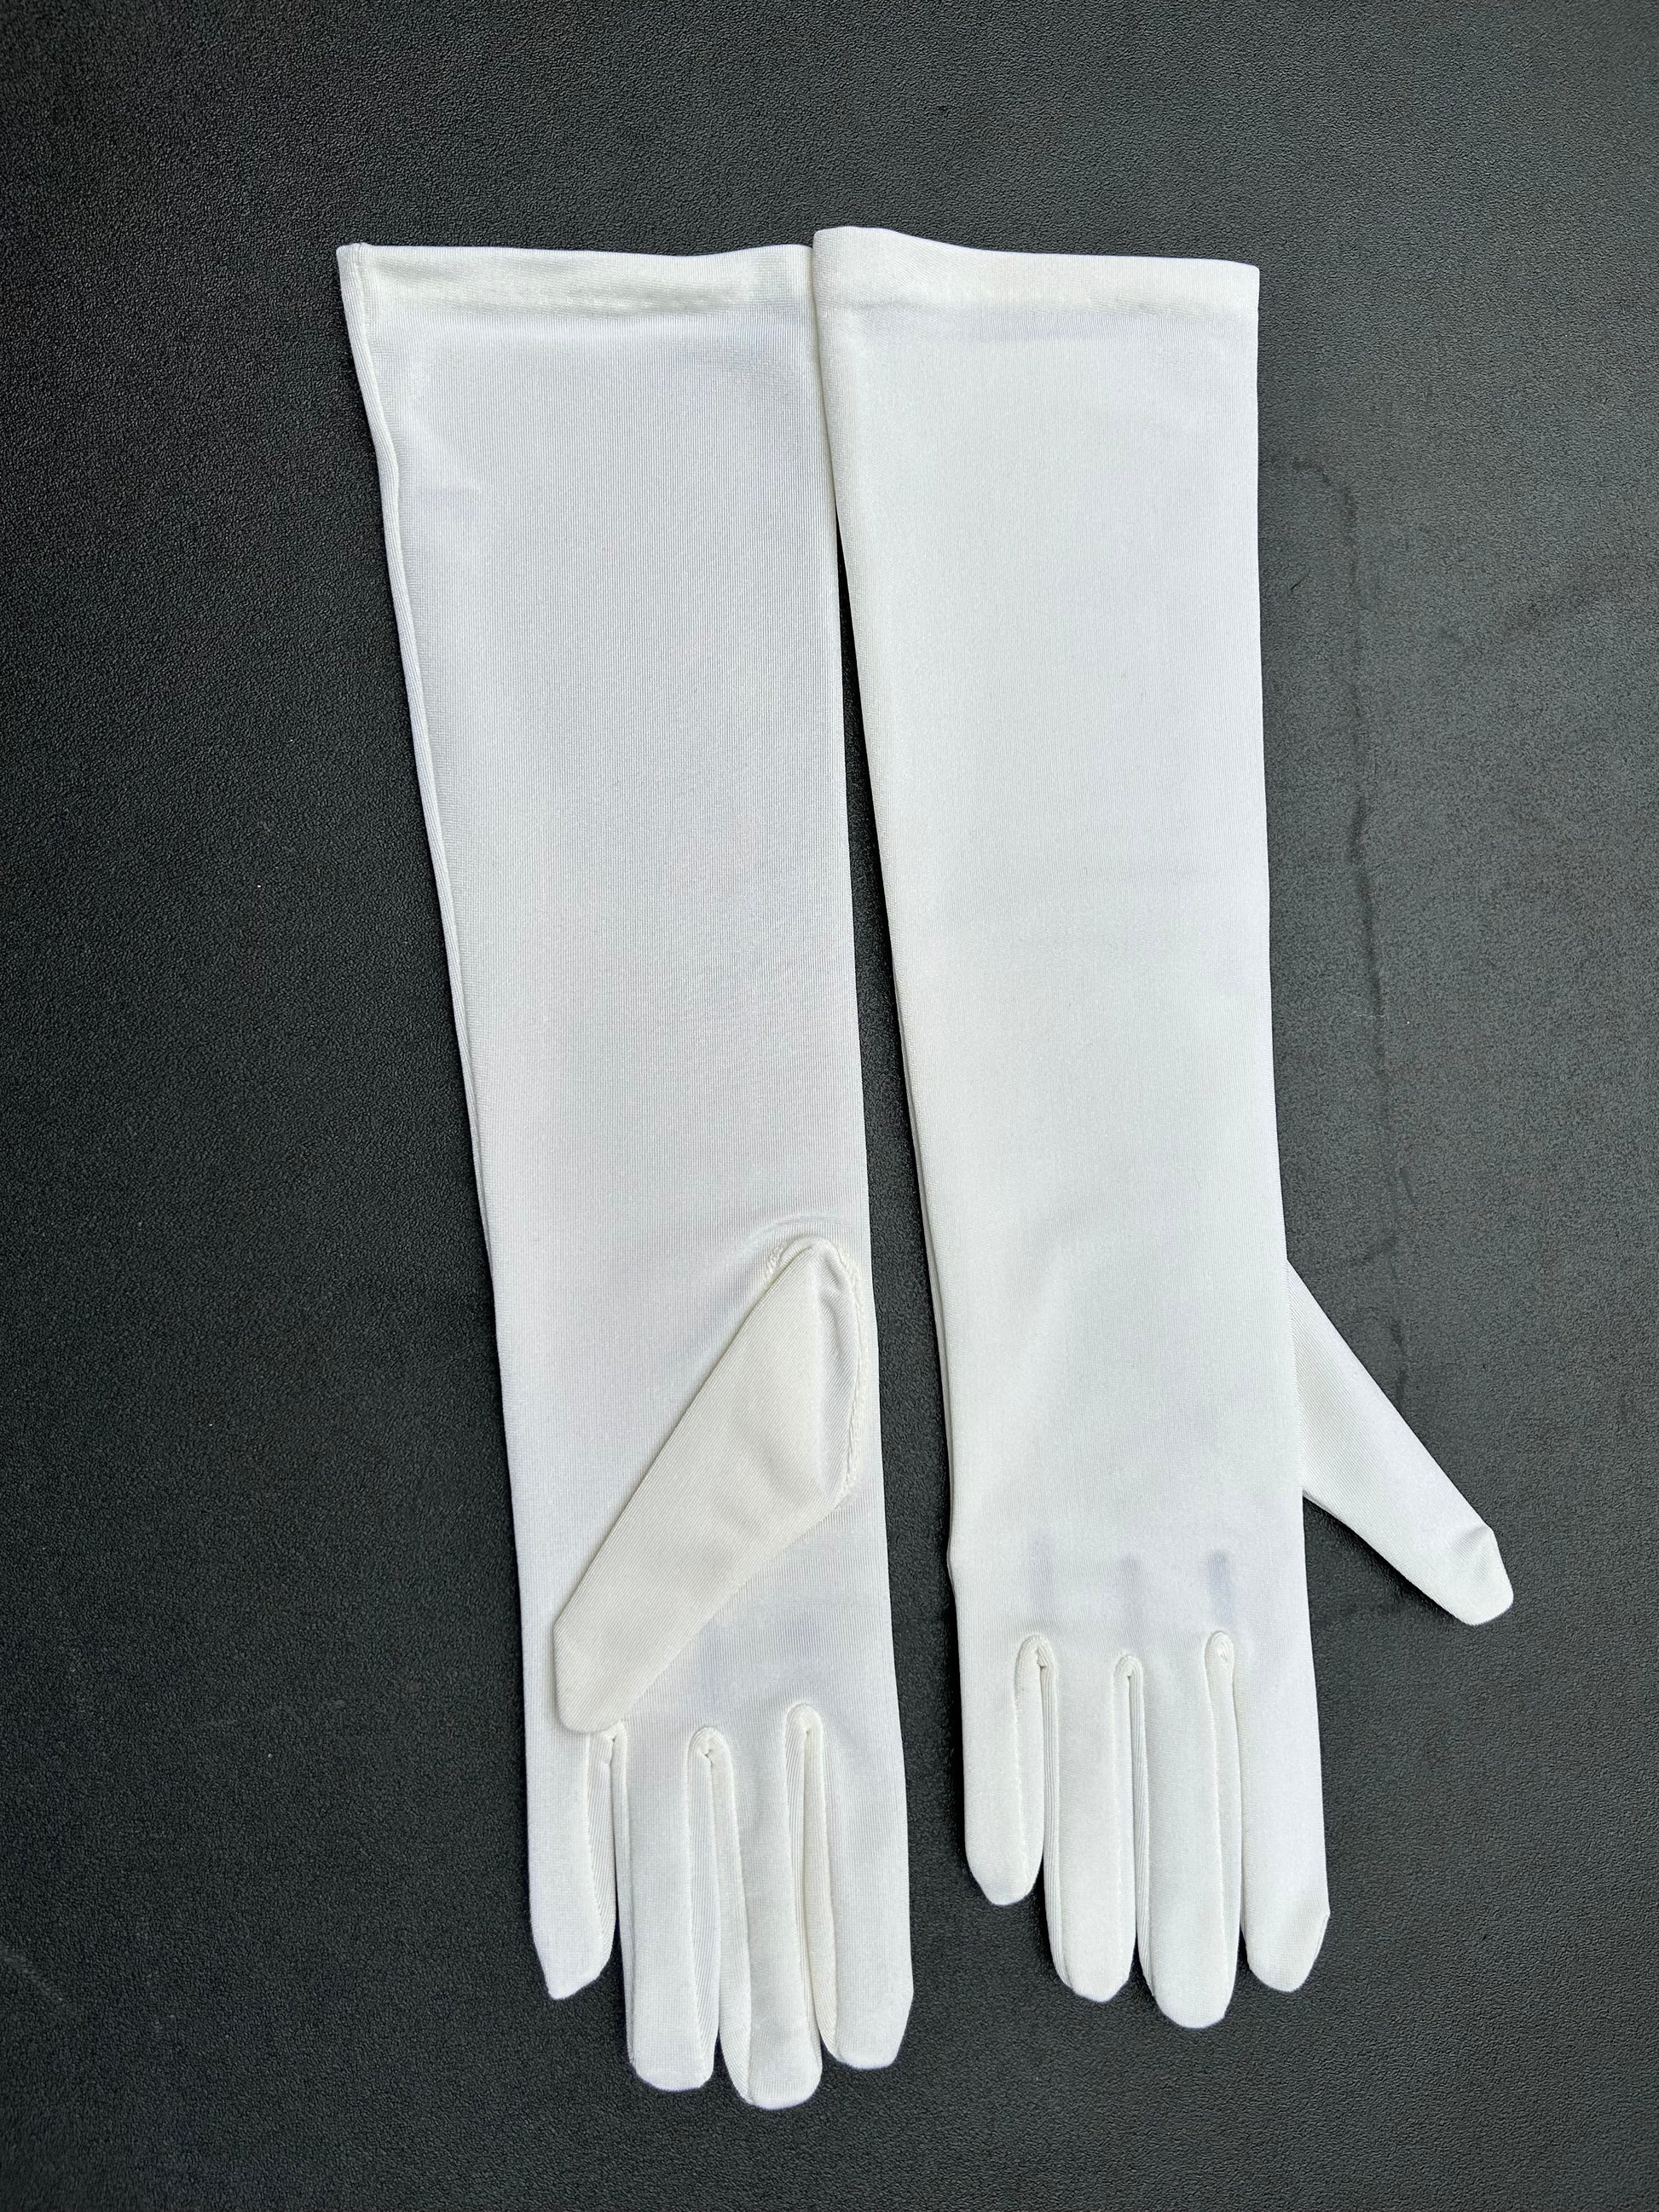 Theatrical Gloves Opera Elbow and Short - MISS LESTER'S 